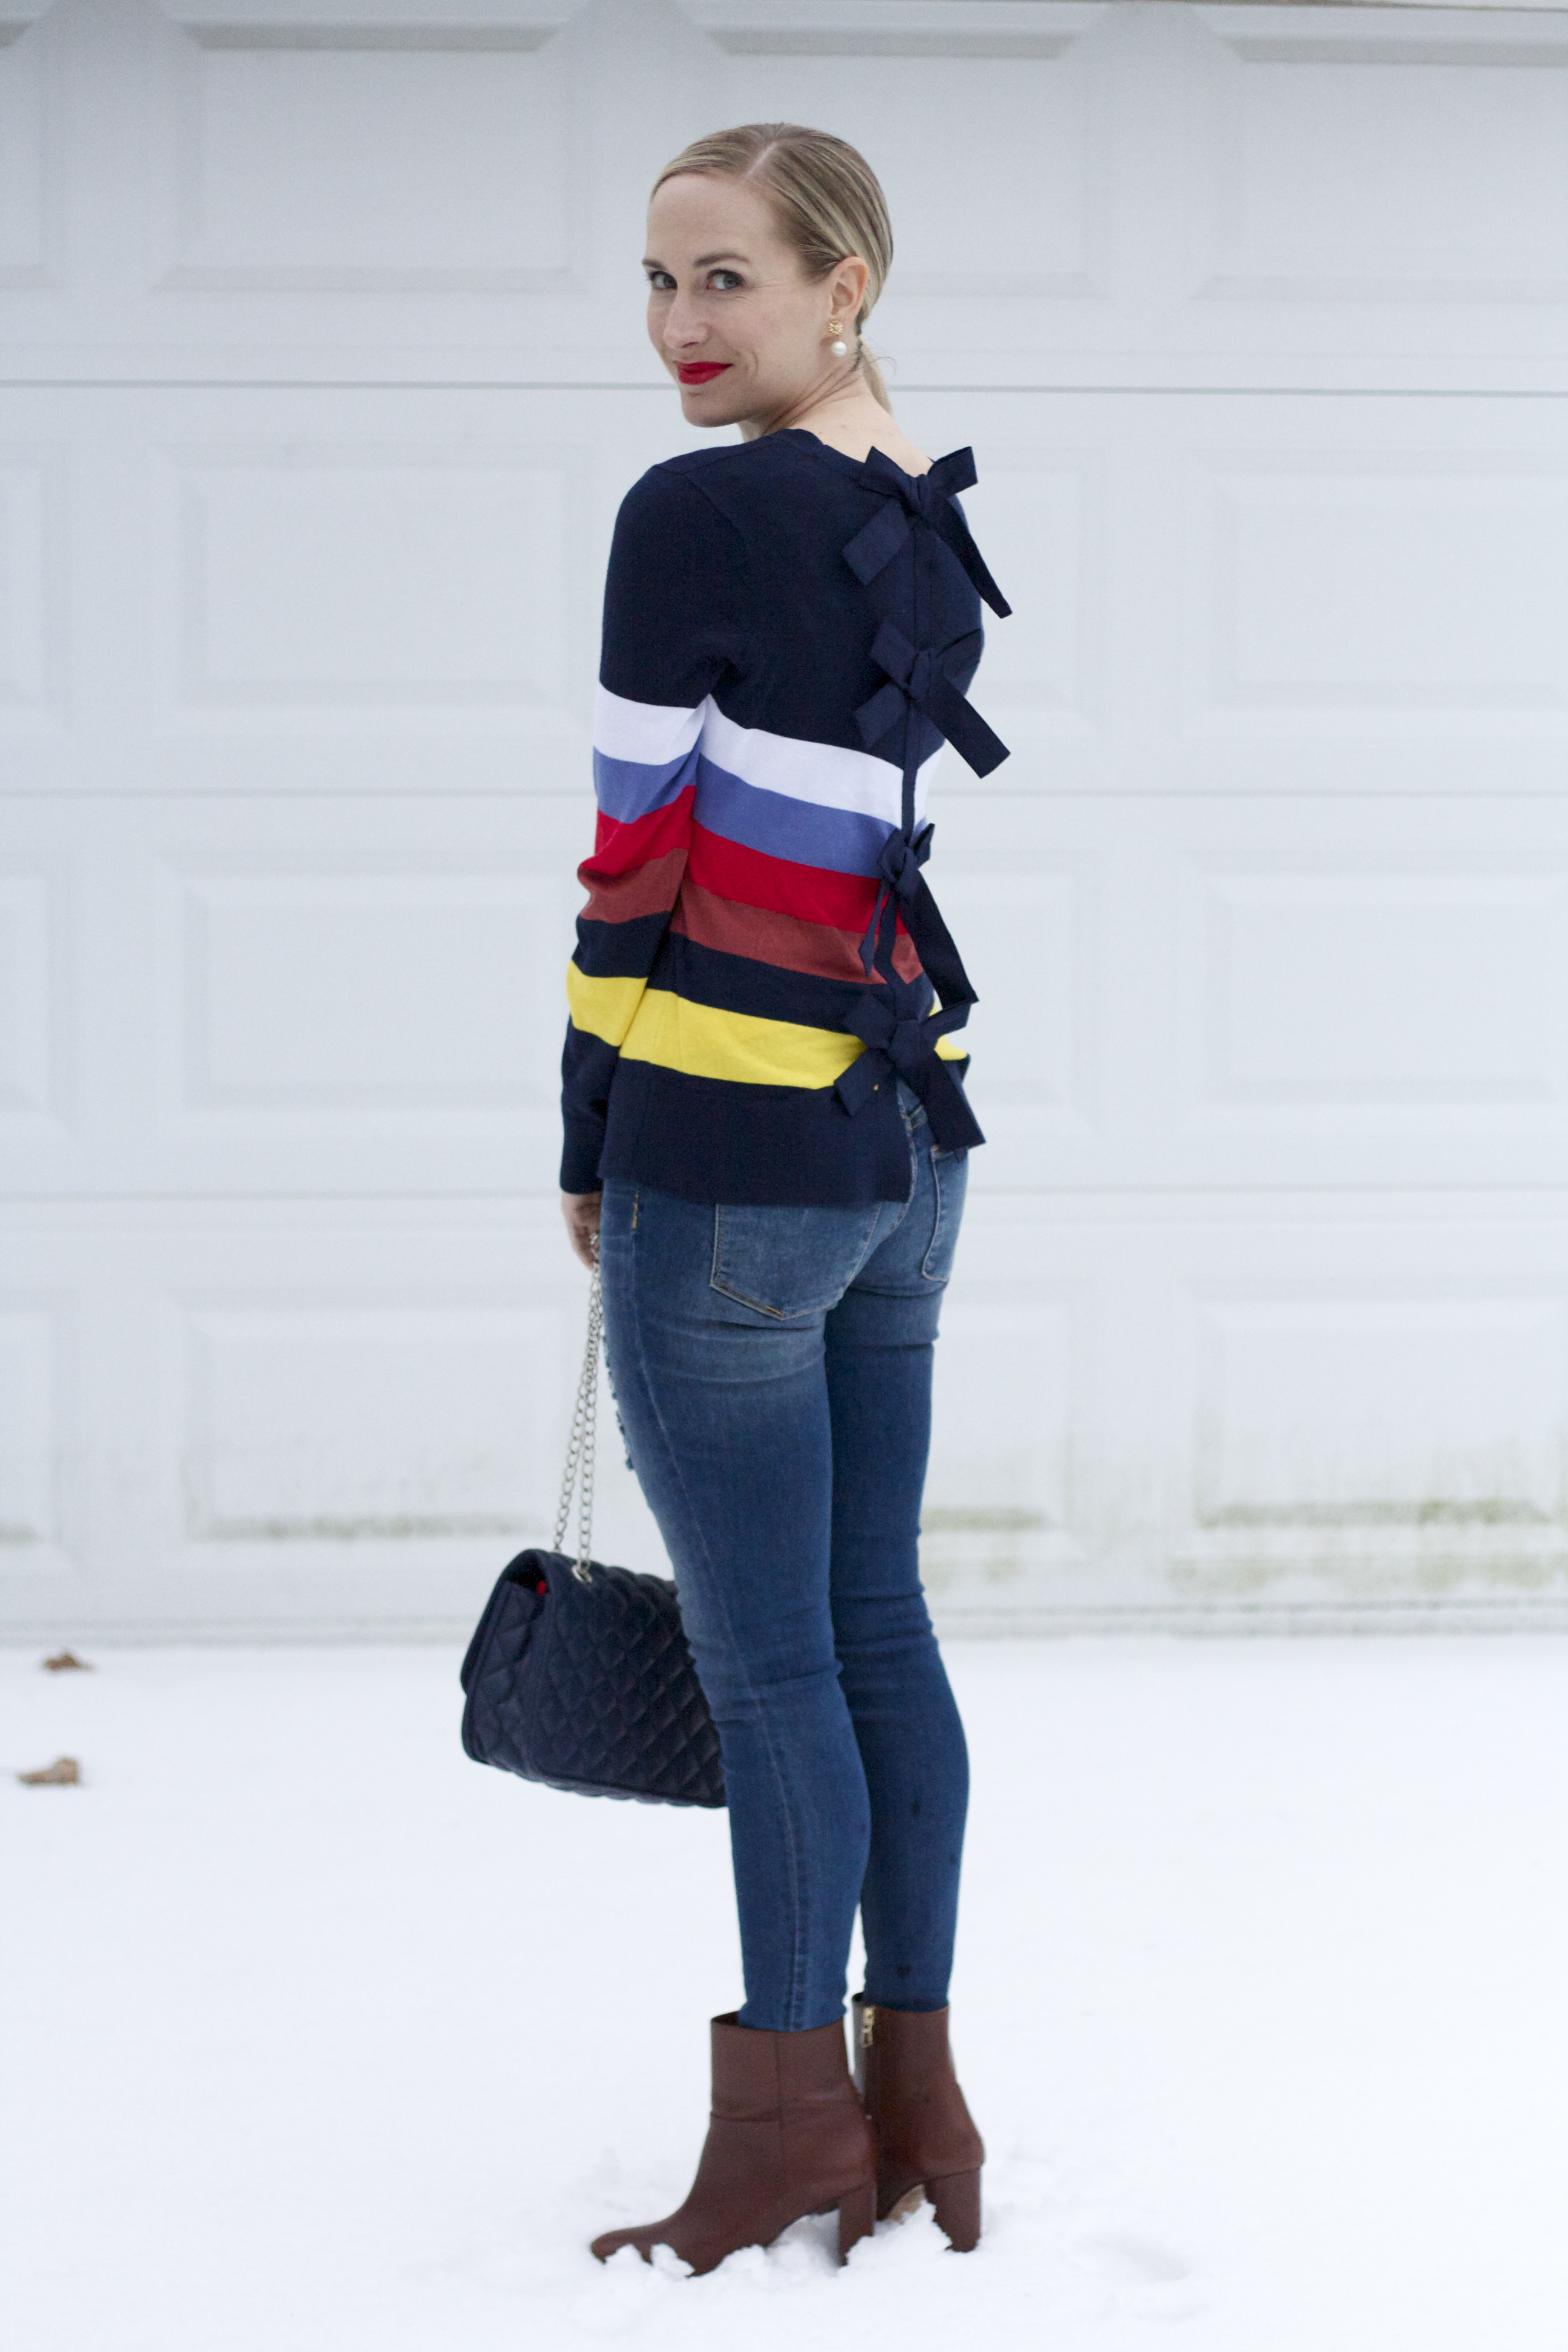 bow back sweater, jeans and ankle boots, quilted bag